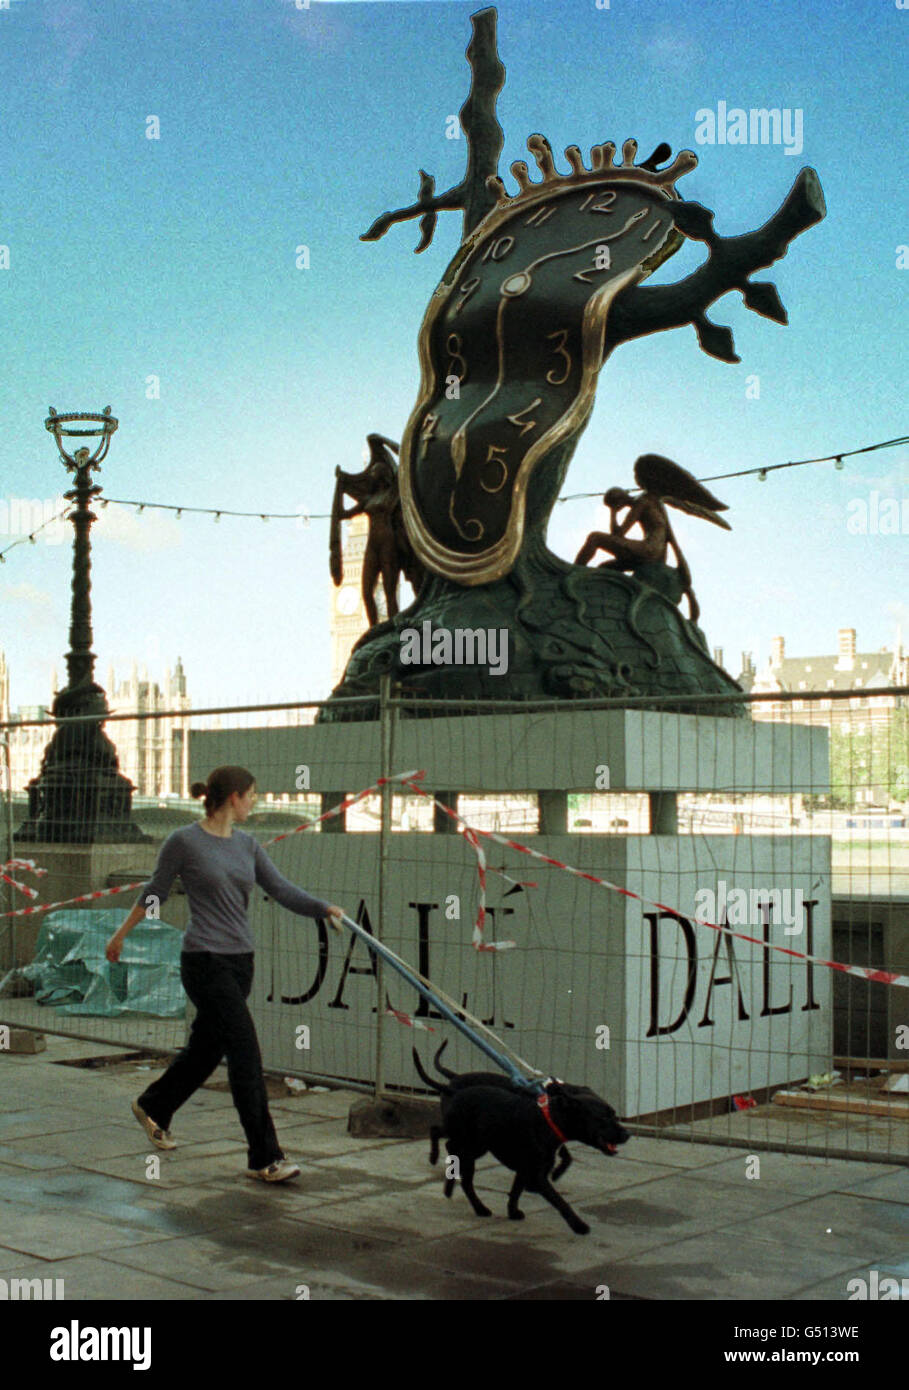 A Salvador Dali sculpture recently erected outside County Hall in London. The statue forms part of the 'Dali Universe', a 30,000 square foot permanent exhibition space dedicated to one of the greatest surrealist artists of the Twentieth Century. * The exhibition opens 25/5/00. Stock Photo